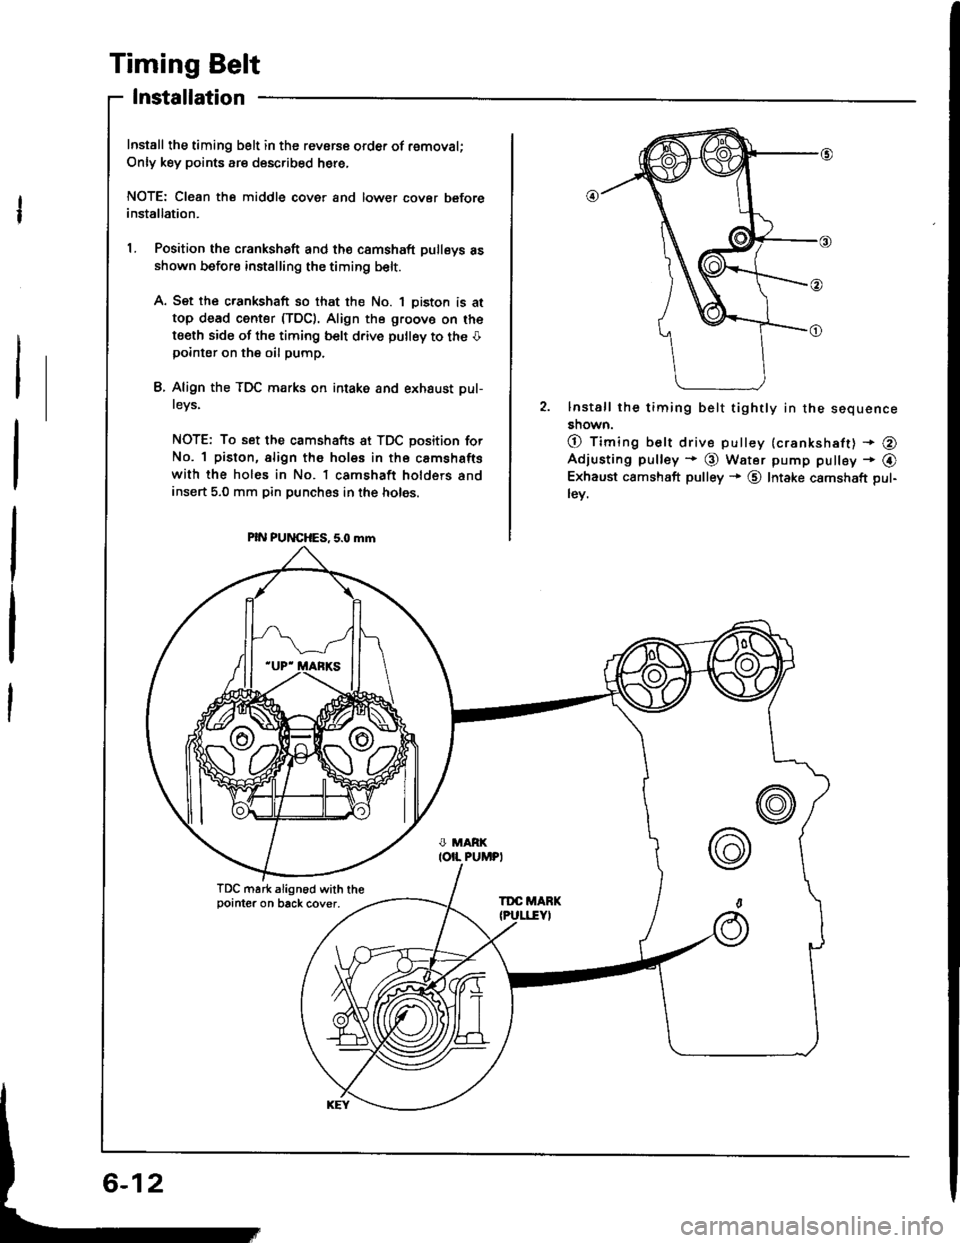 HONDA INTEGRA 1994 4.G Workshop Manual Timing Belt
Installation
Install the timing belt in the revorce order of removal;
Only key points are described here,
NOTE: Cl€an the middle cover and lower cover beforeinstallation.
L Position the 